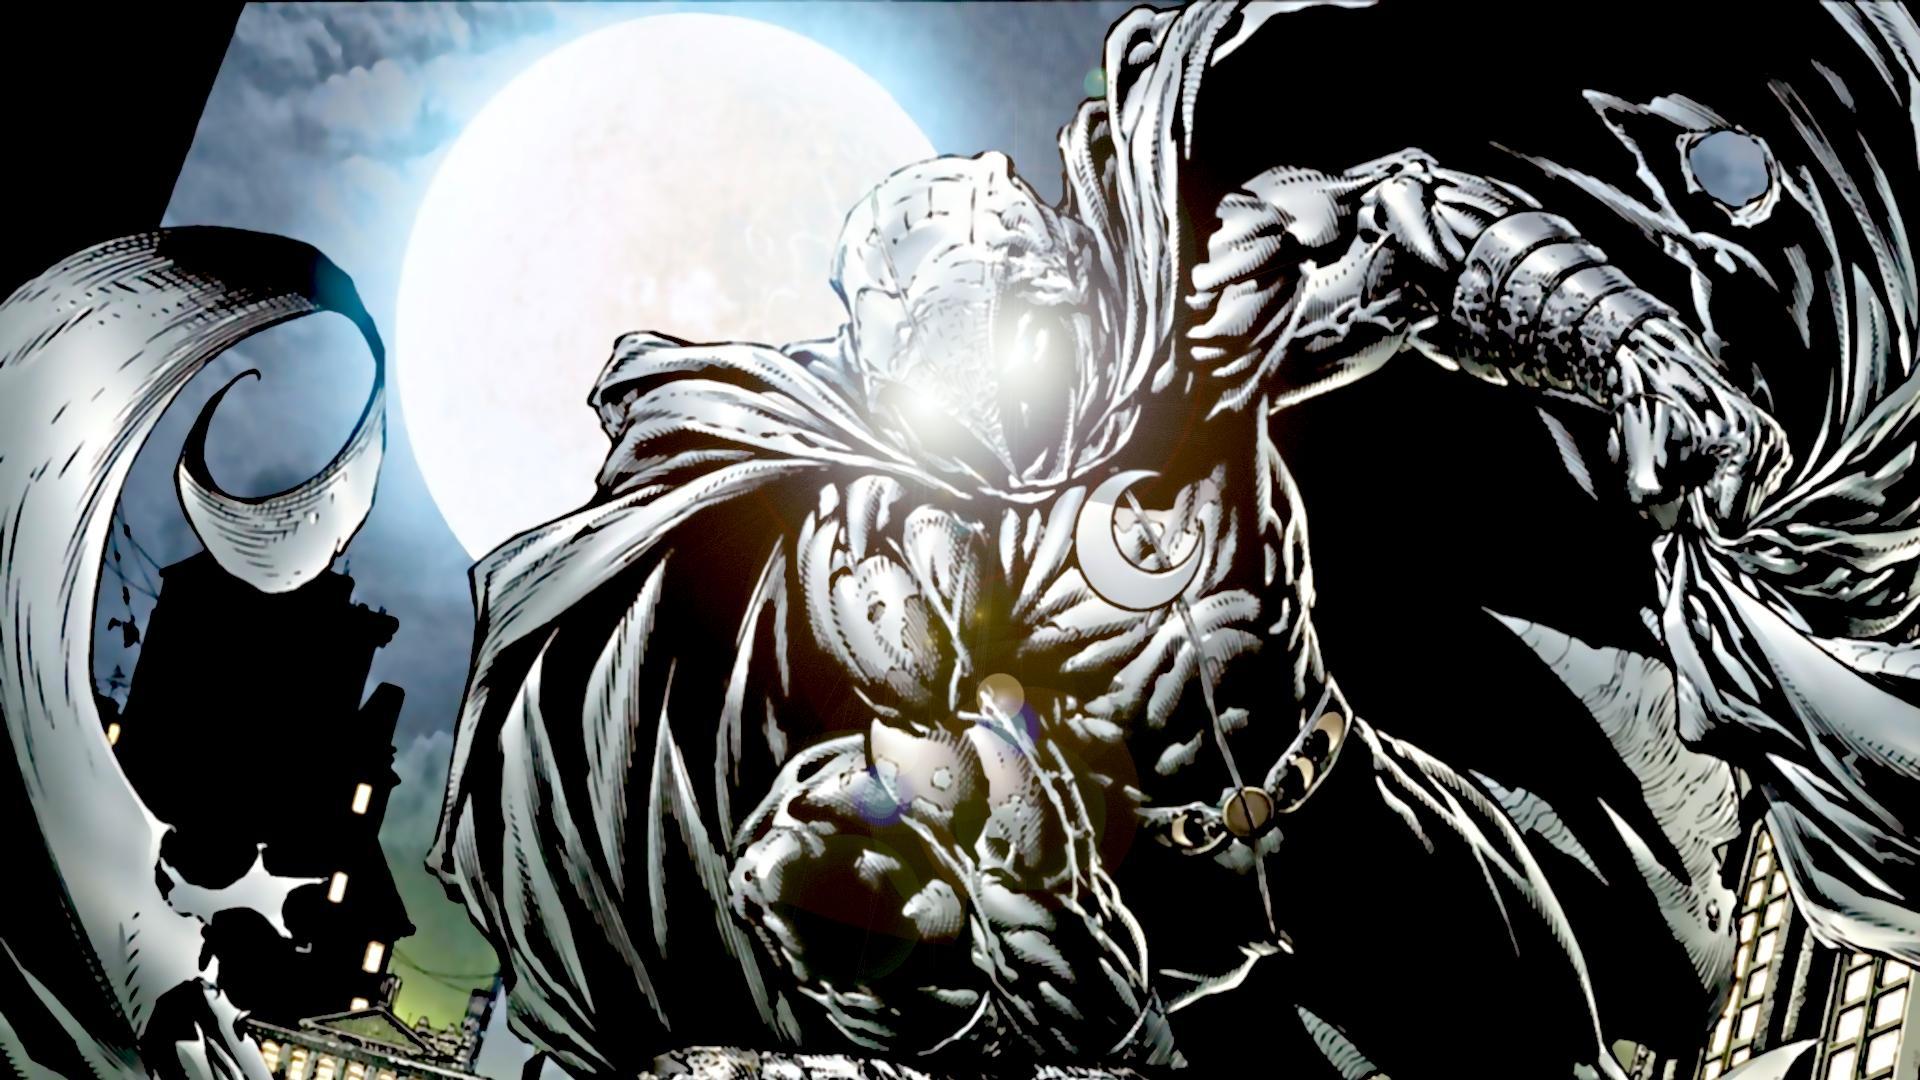 image For > Moon Knight And Deadpool Wallpaper